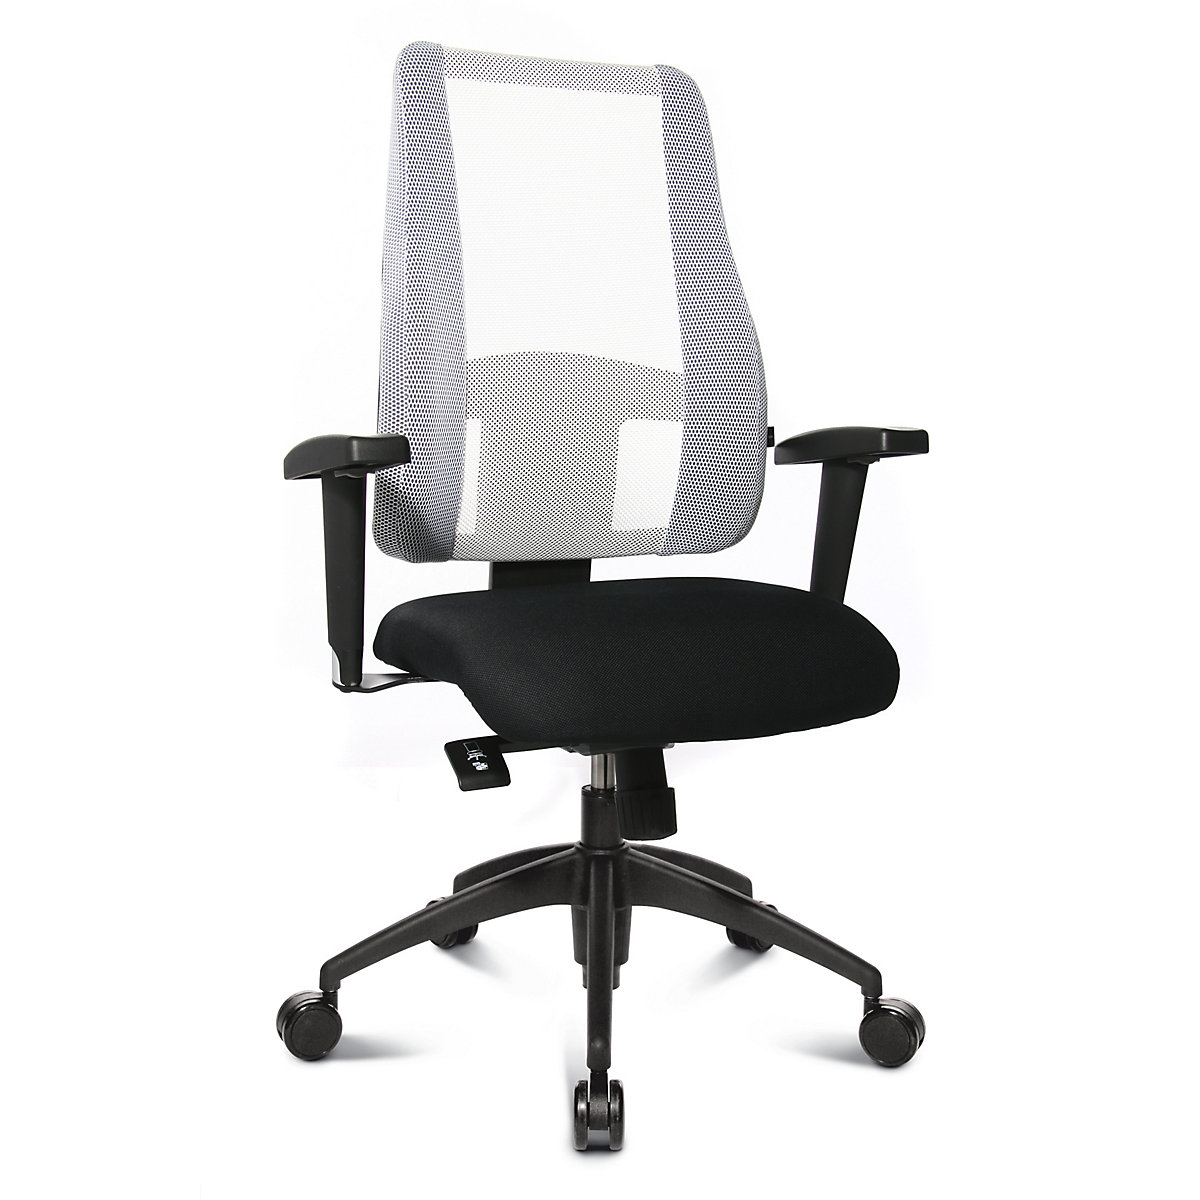 LADY SITNESS DELUXE office swivel chair – Topstar